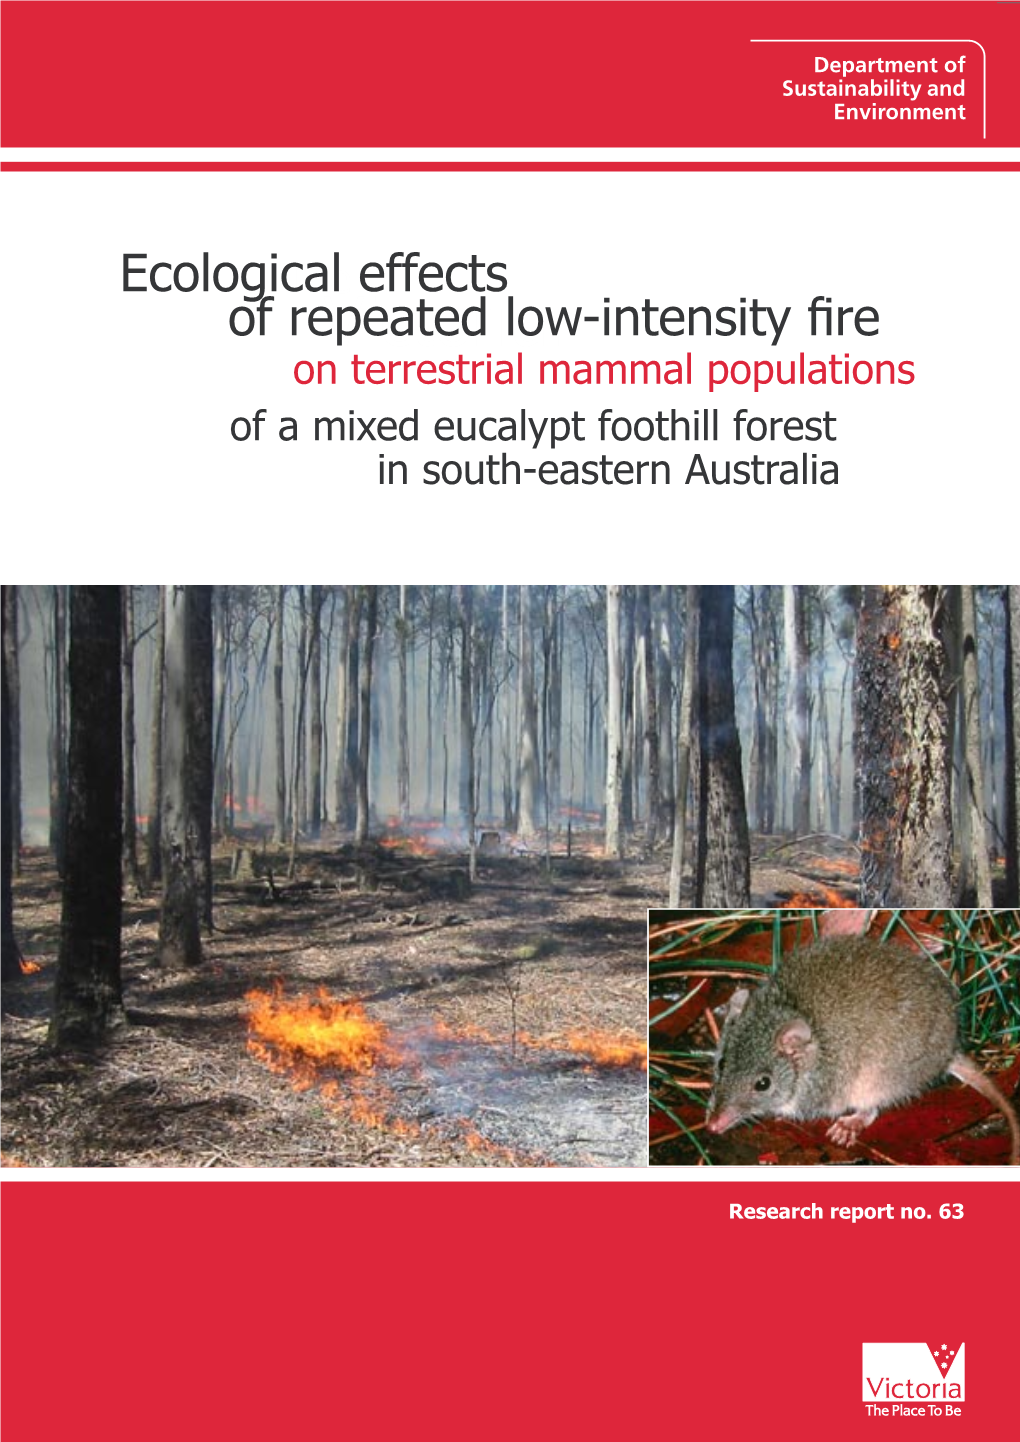 Effects of Repeated Low-Intensity Fire on Terrestrial Mammal Populations of a Mixed Eucalypt Foothill Forest in South-Eastern Australia